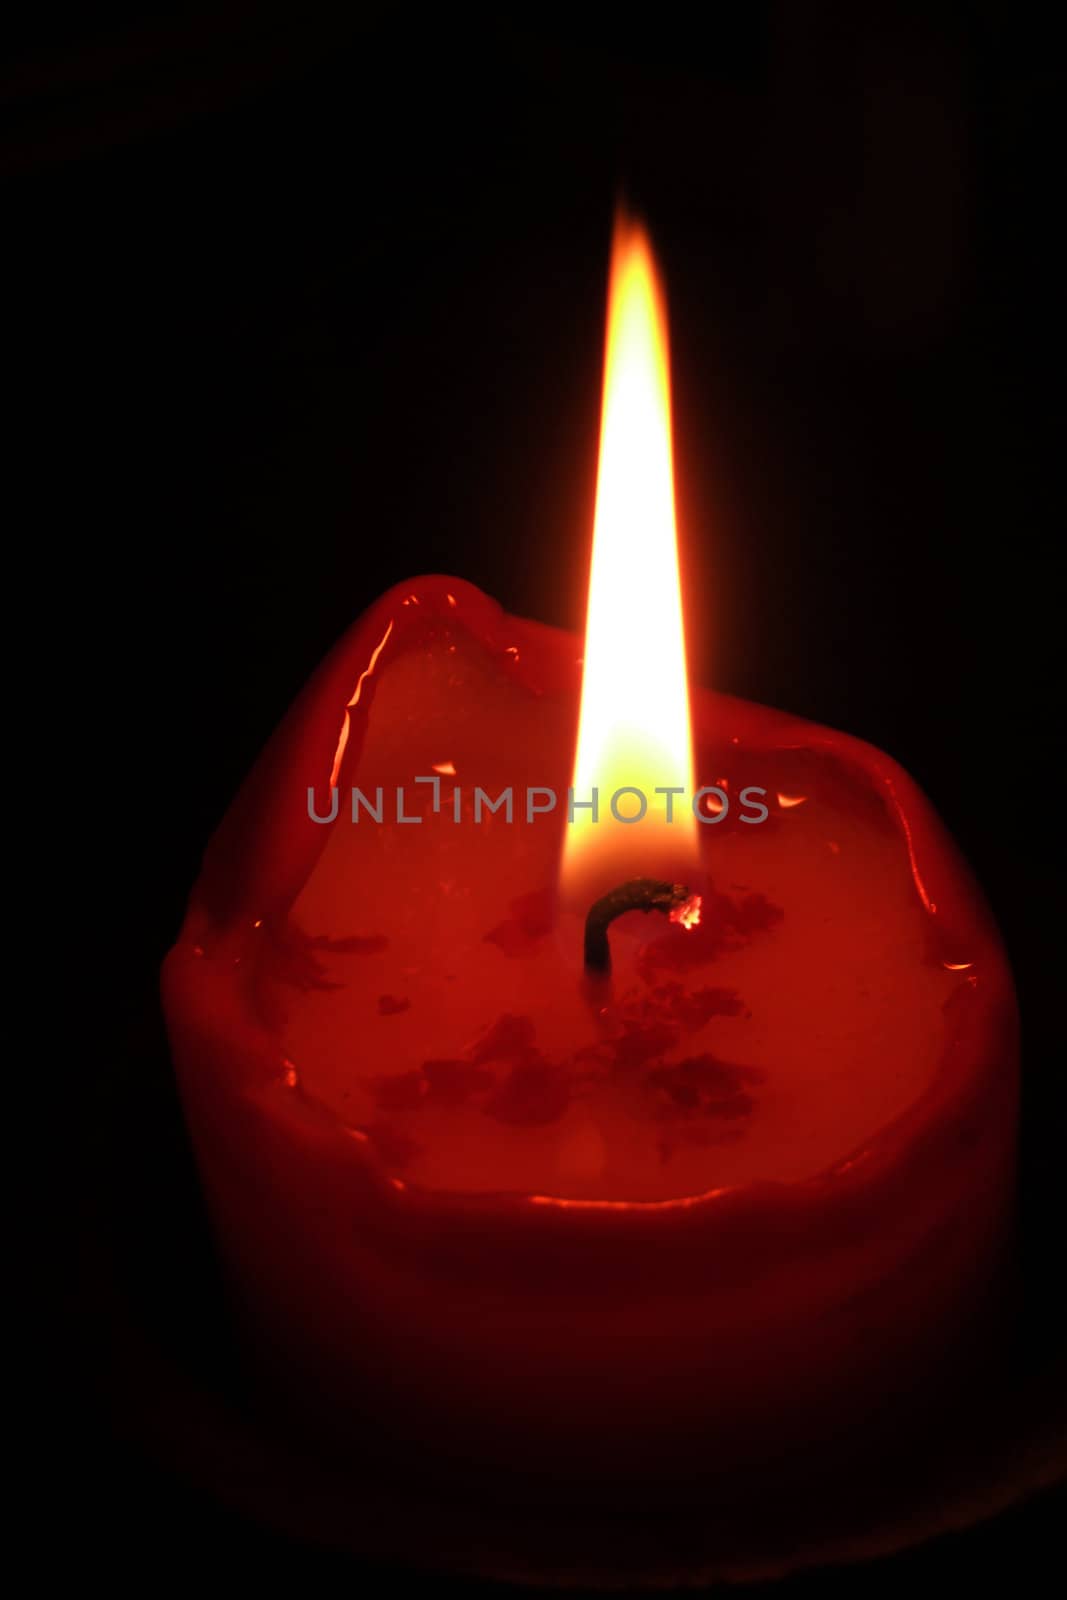 Burning candle, black background by ystock